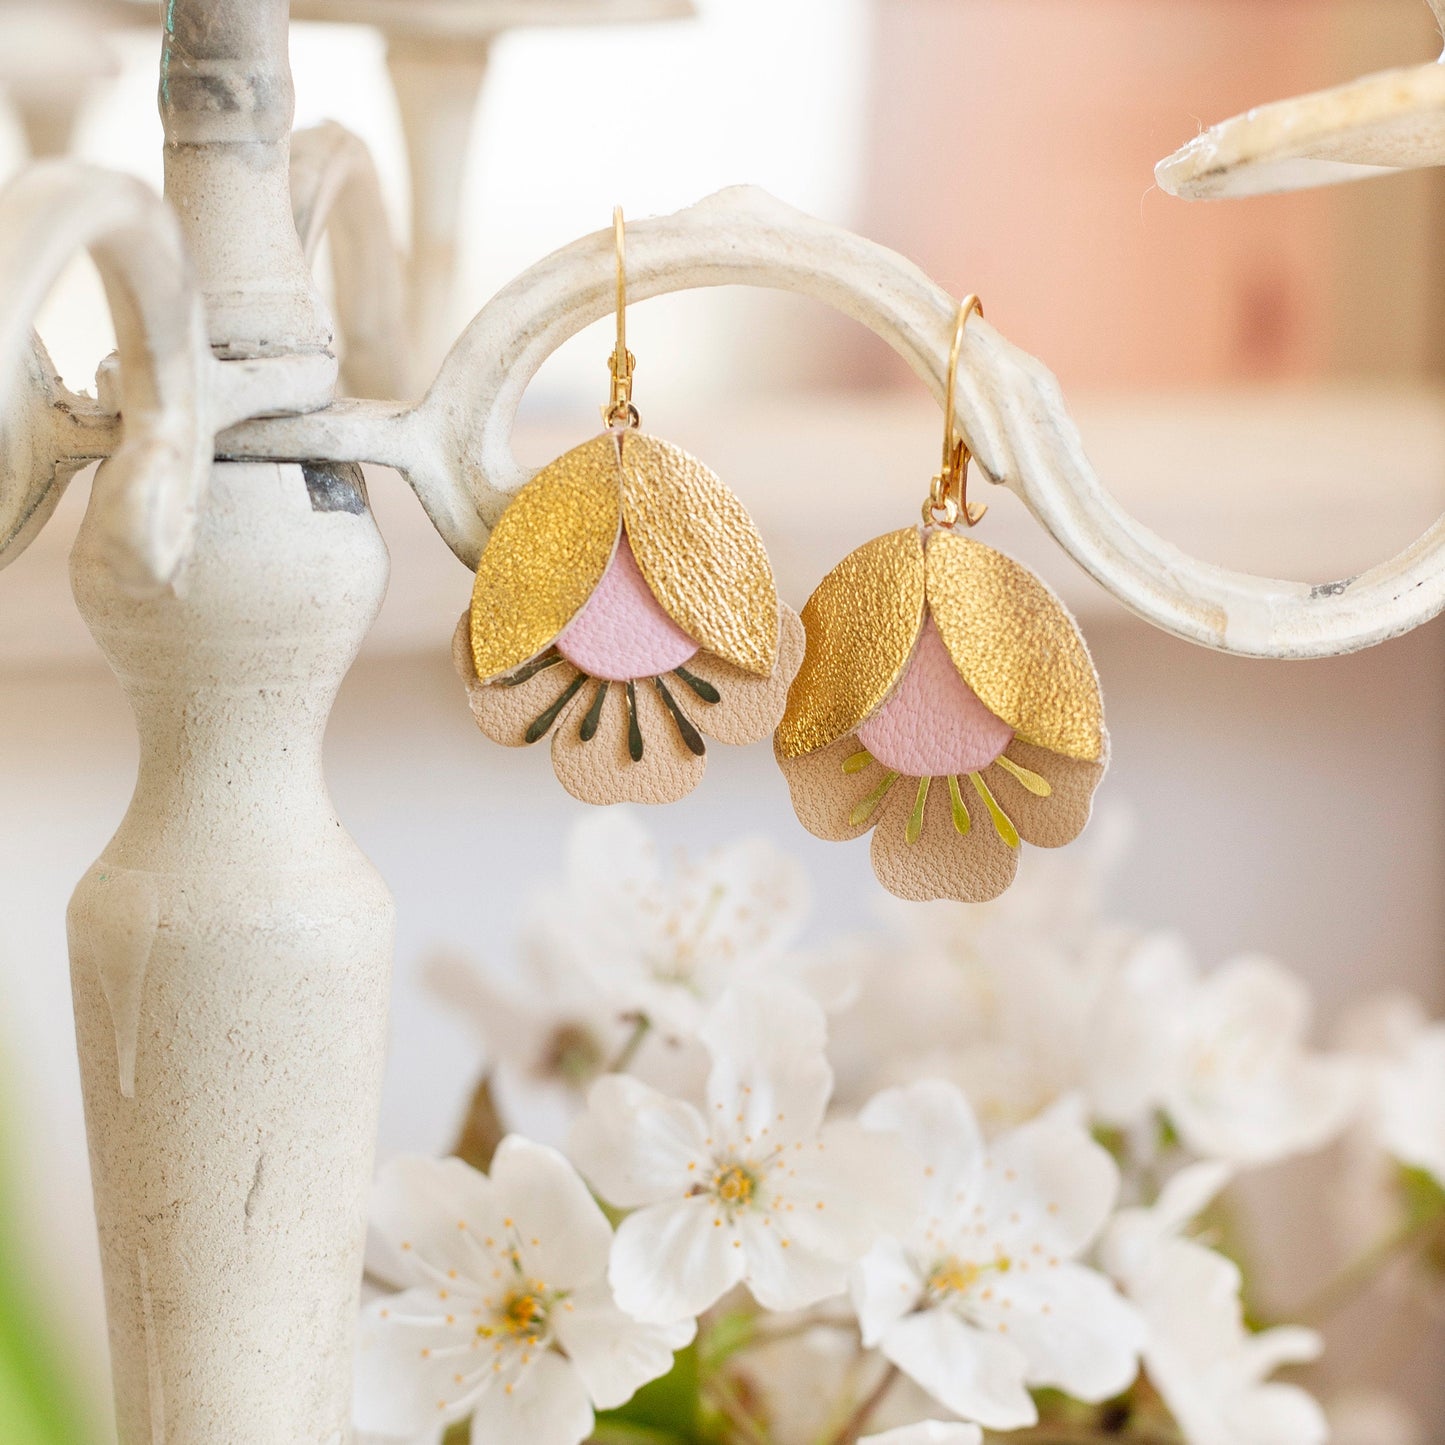 Cherry blossom earrings in pink gold beige leather